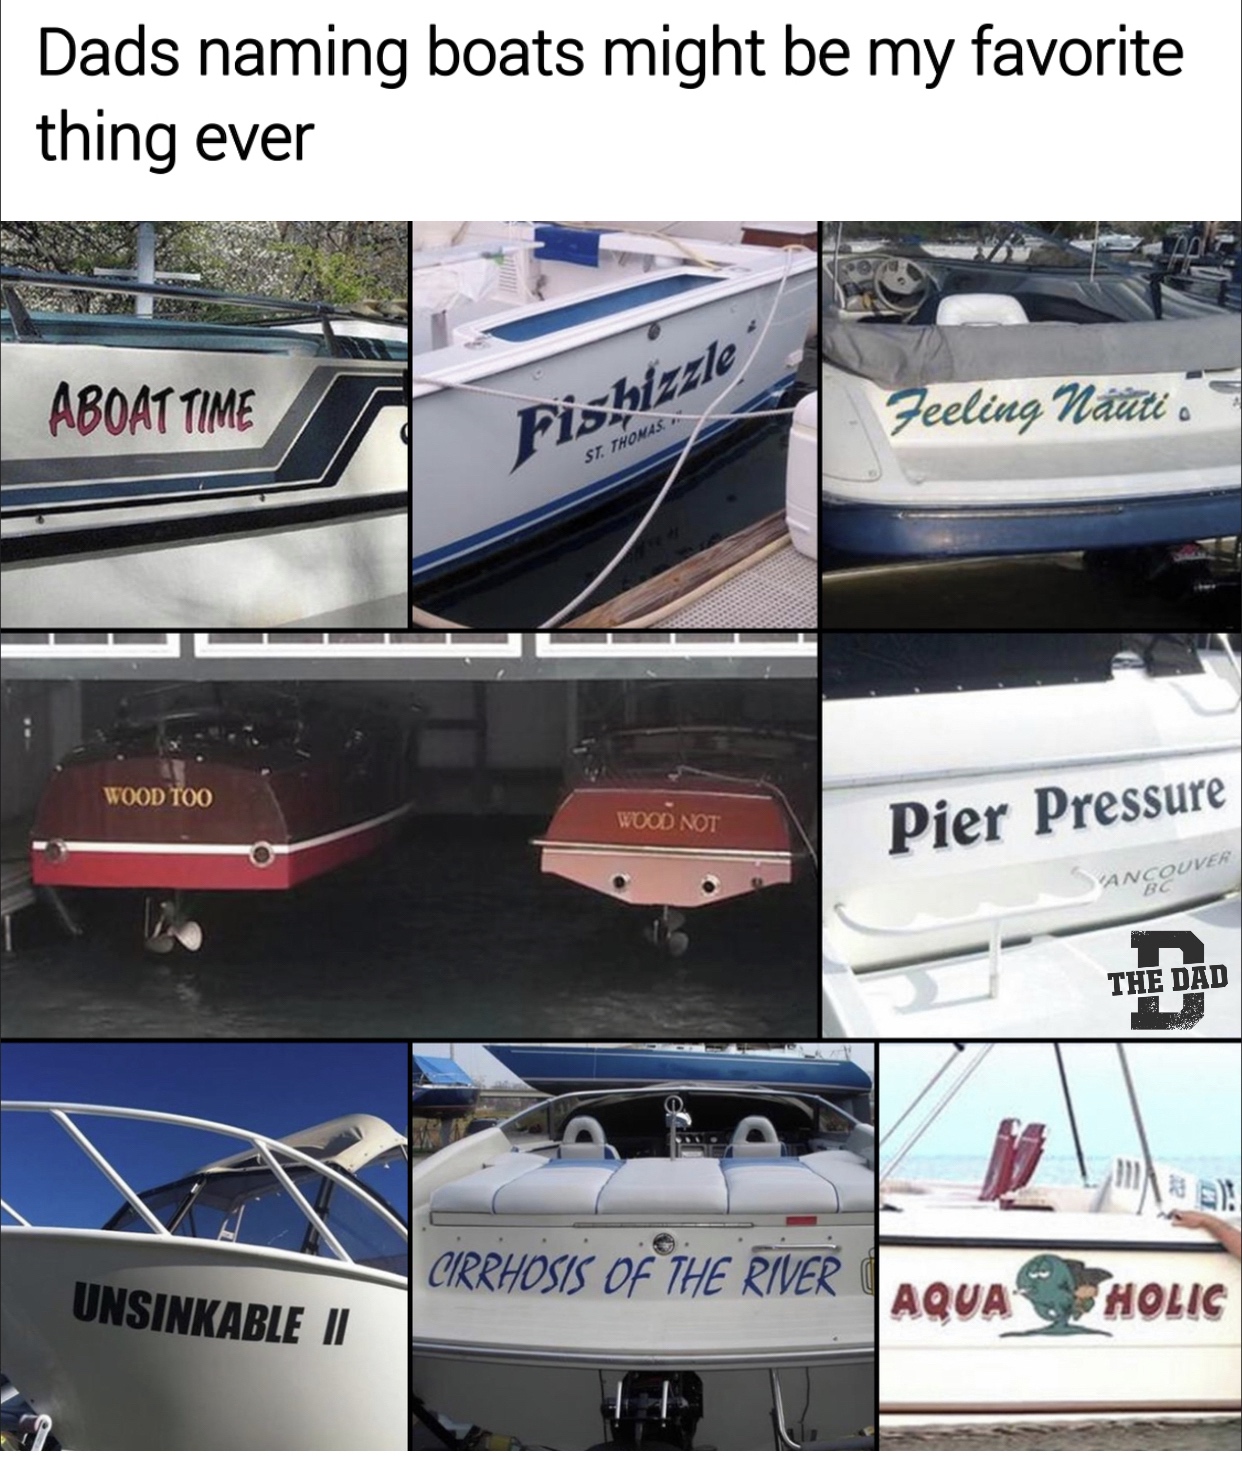 water transportation - Dads naming boats might be my favorite thing ever Aboat Time Feeling Nauti Tood Too Voco Not Pier Pressure Sance The Dad Cirrhosis Of The River Unsinkable Ii Aqua Holic